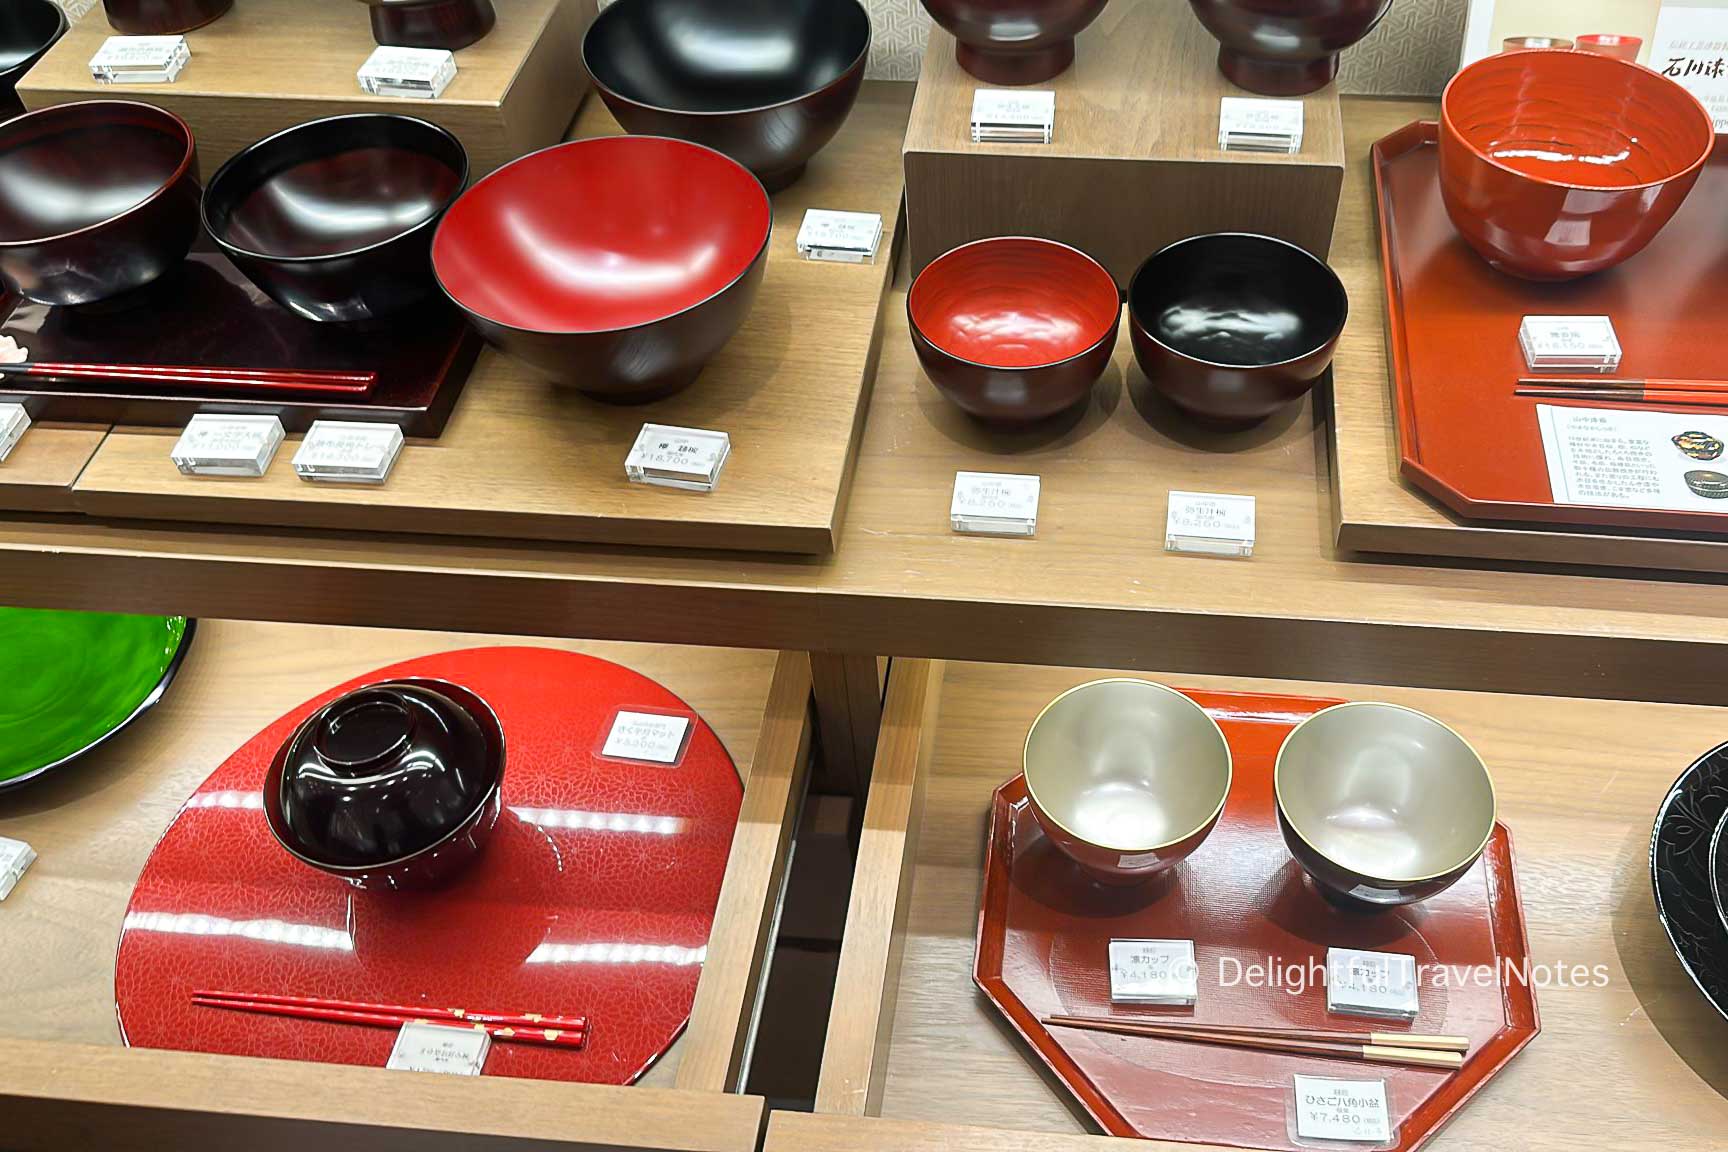 shelves of Japanese lacquerware on display at Mitsukoshi department store.